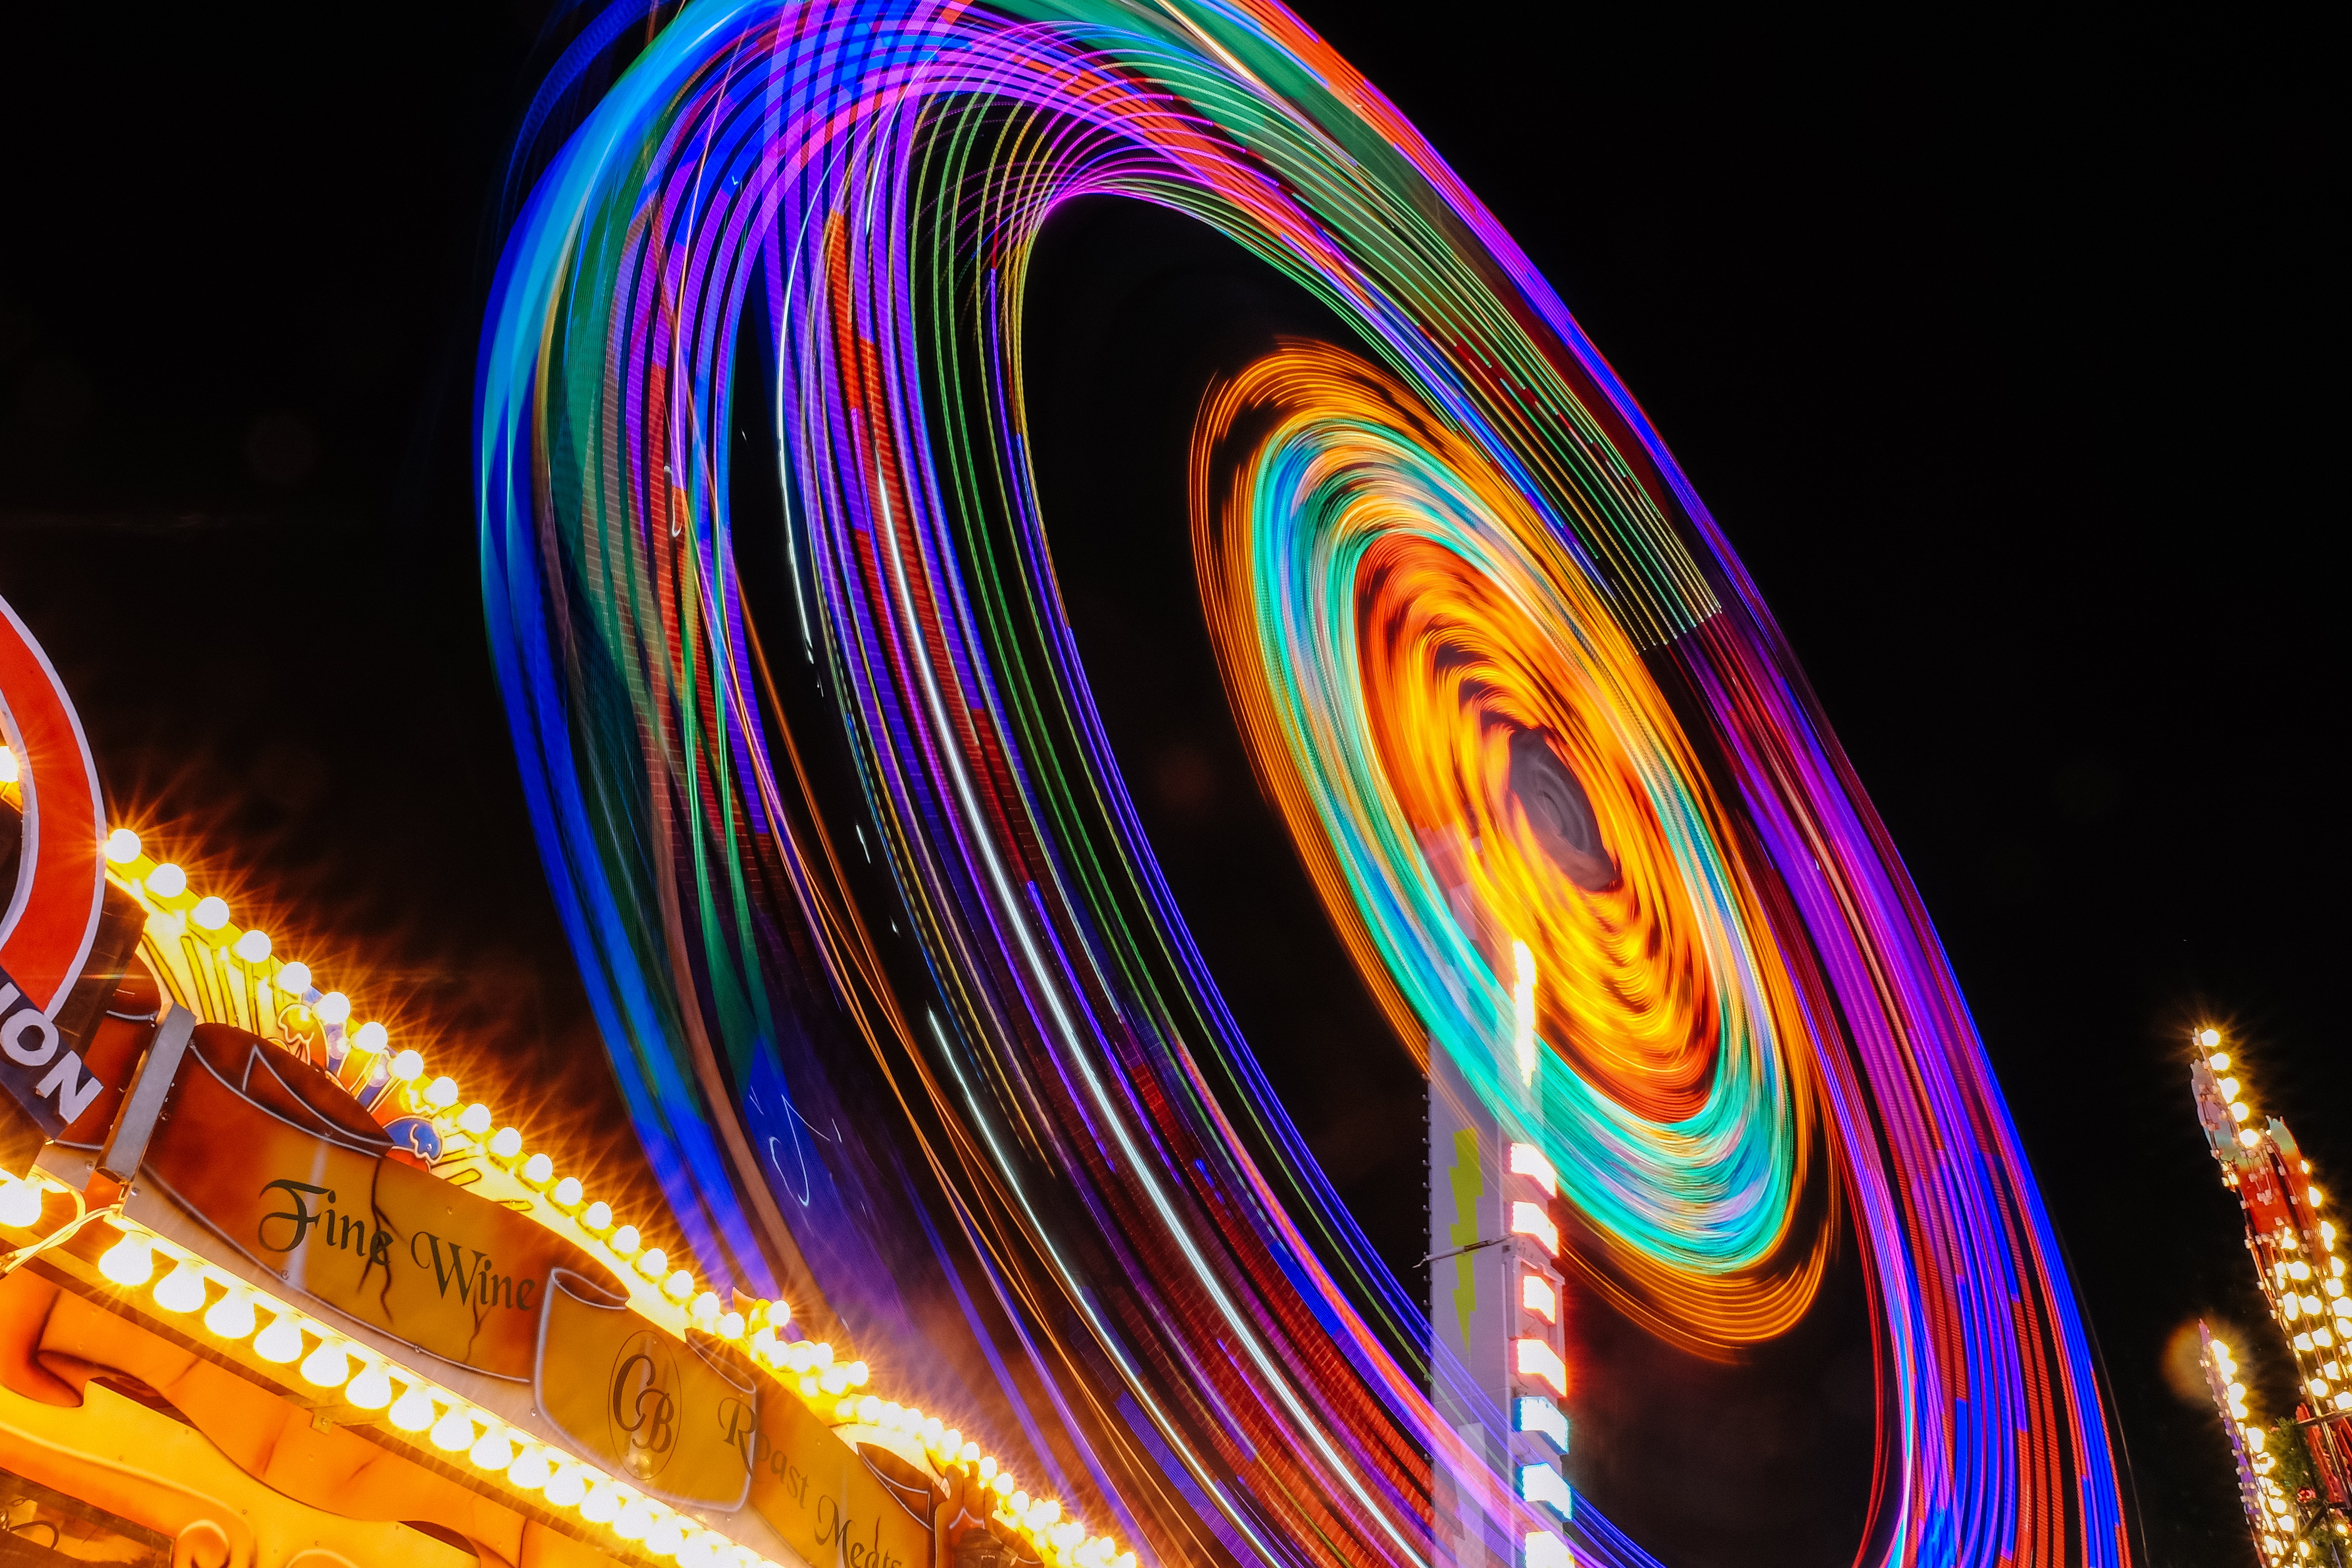 Time lapse of a ferris wheel at night creating circles of neon colors